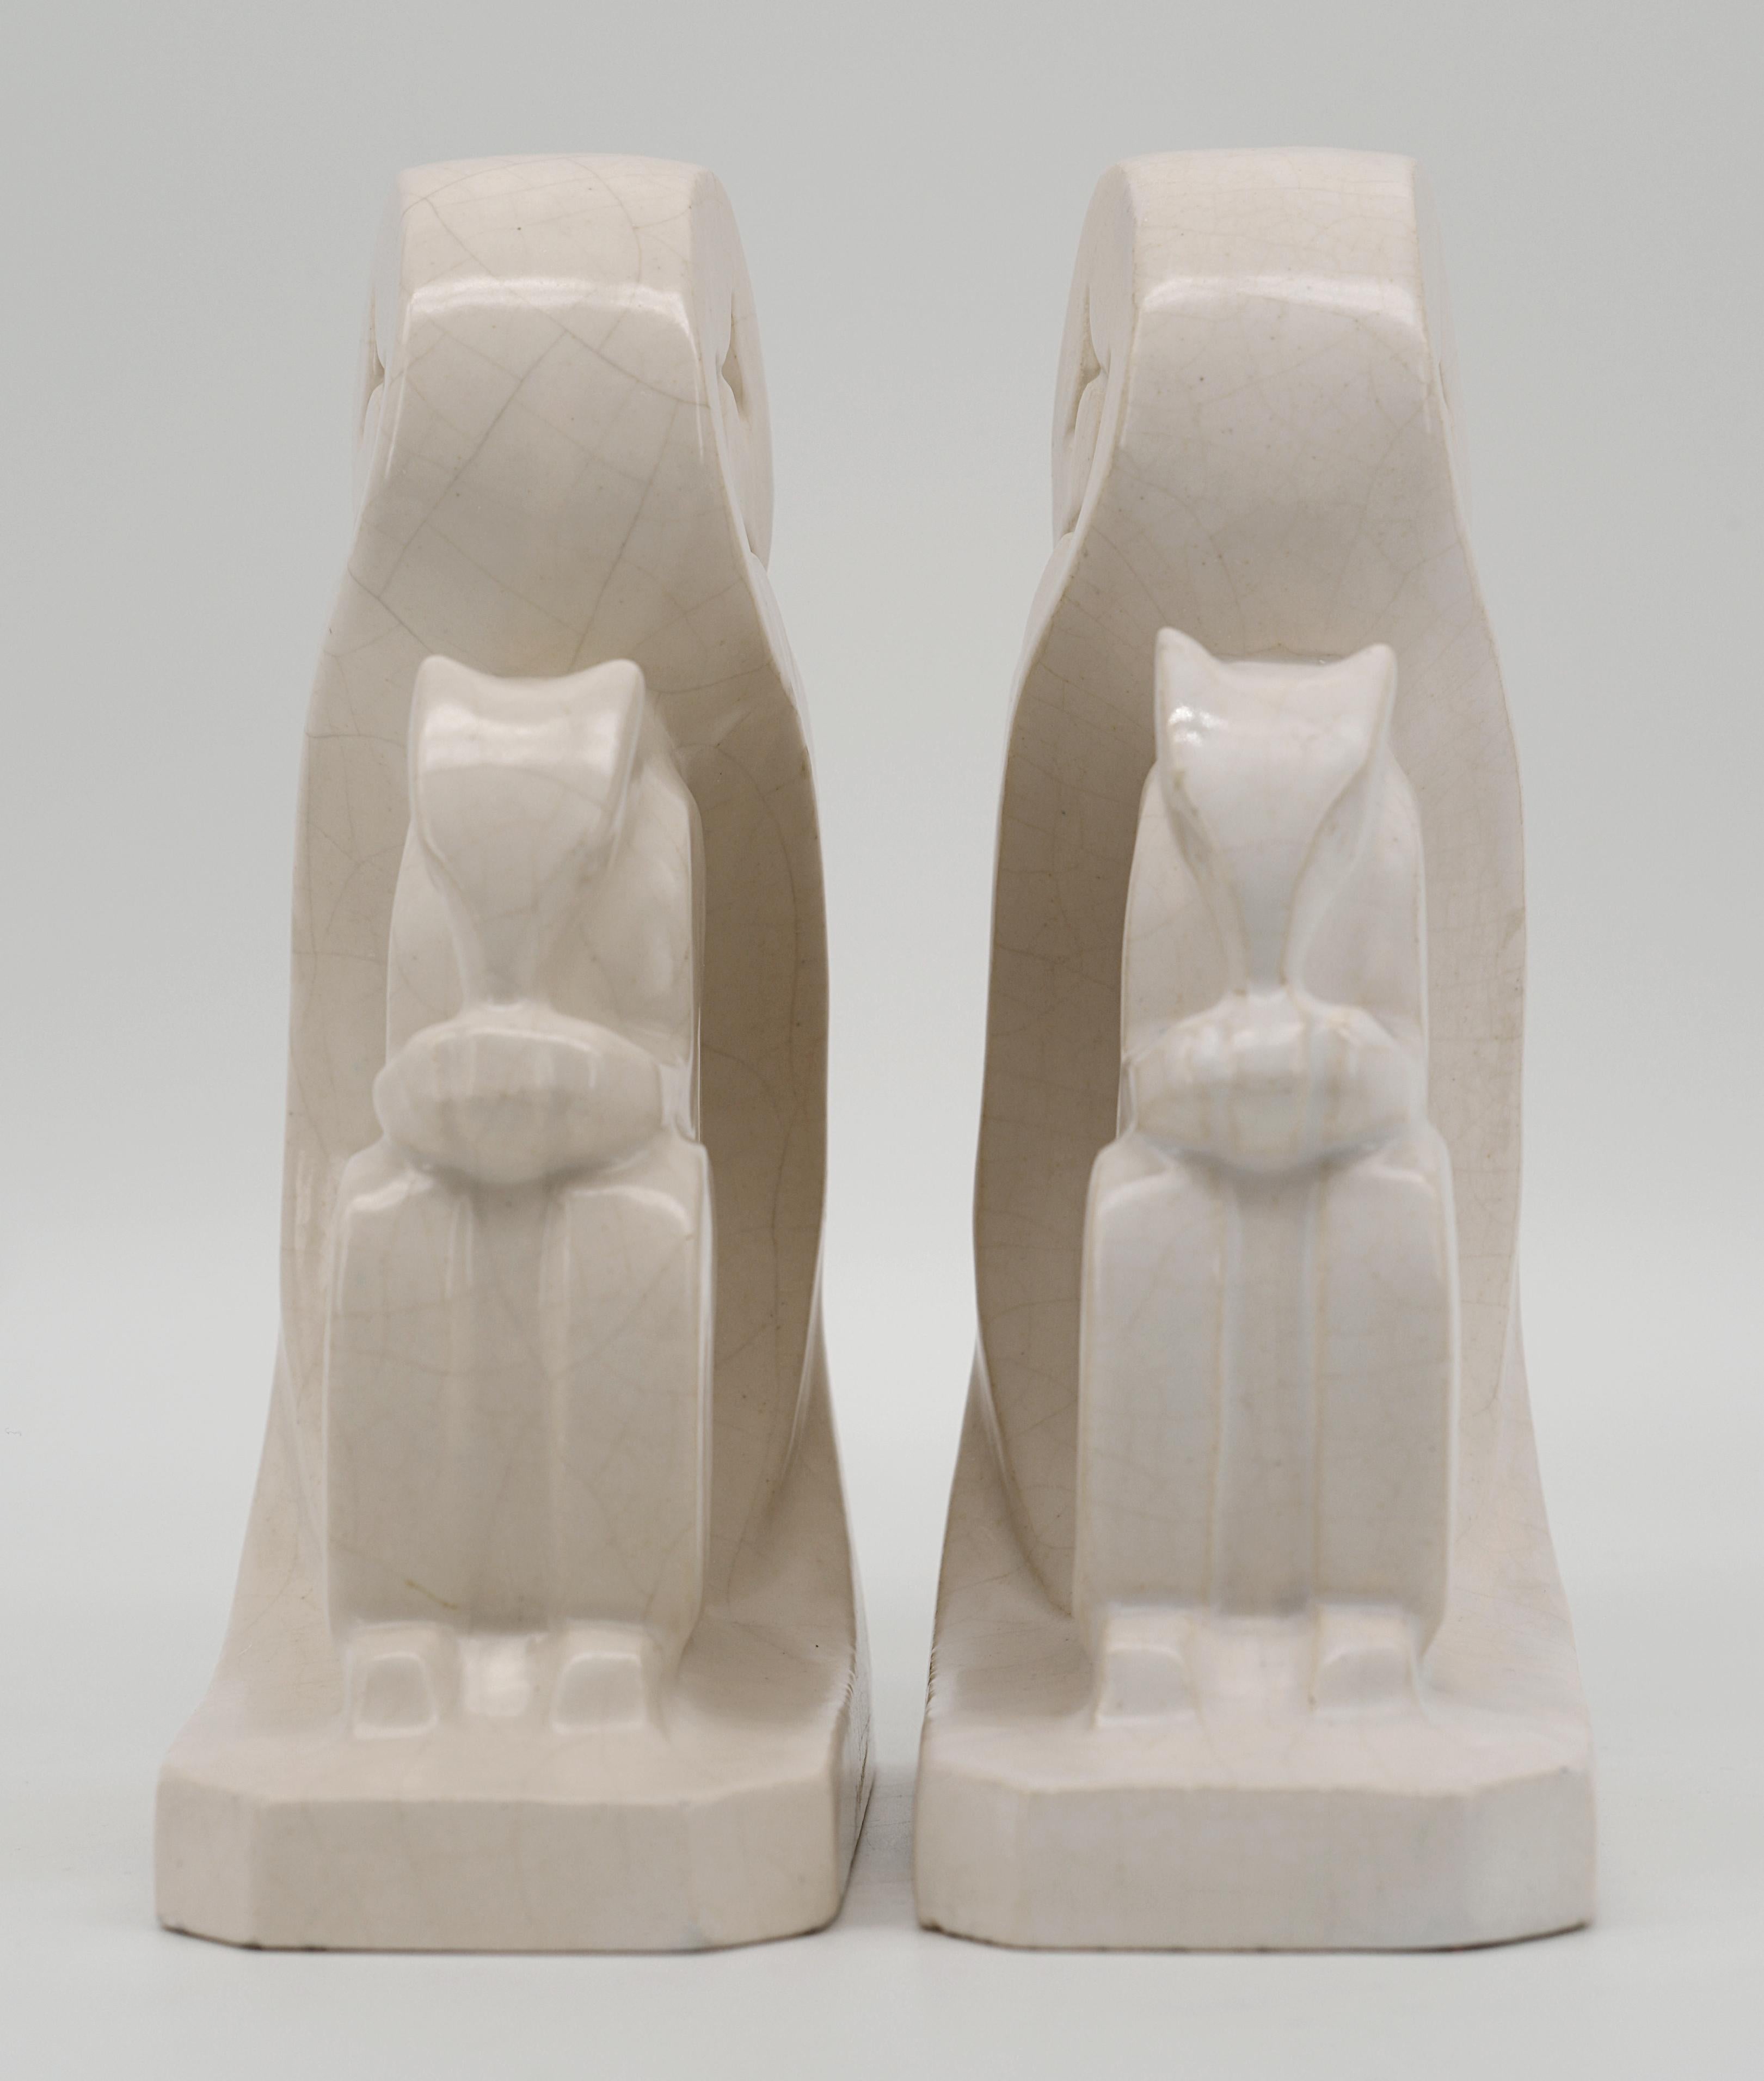 Octave LARRIEU French Art Deco Squirrel Bookends Pair, 1930s For Sale 2